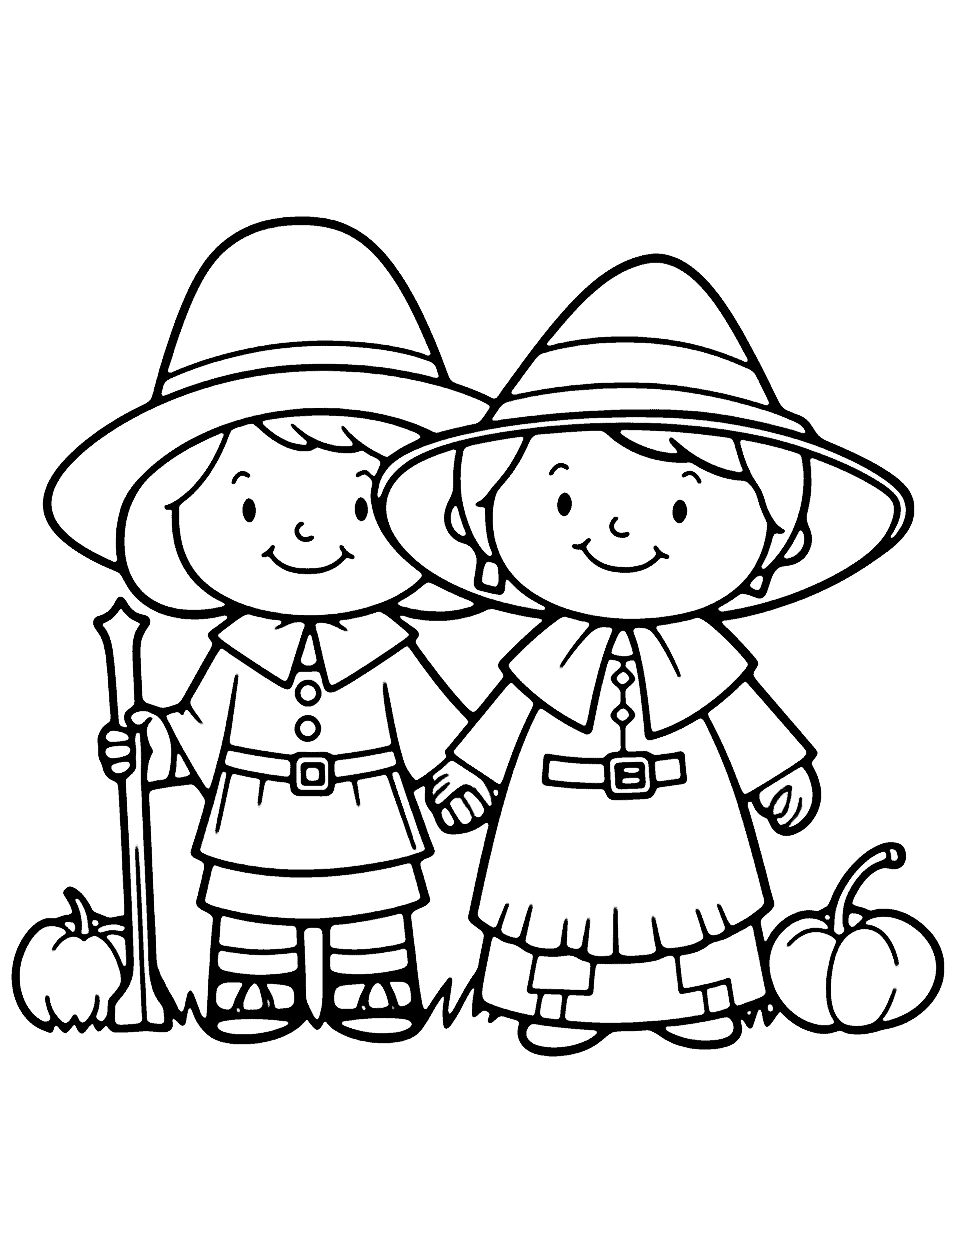 Cute Little Pilgrims Thanksgiving Coloring Page - An adorable scene of little pilgrims for kids to color.